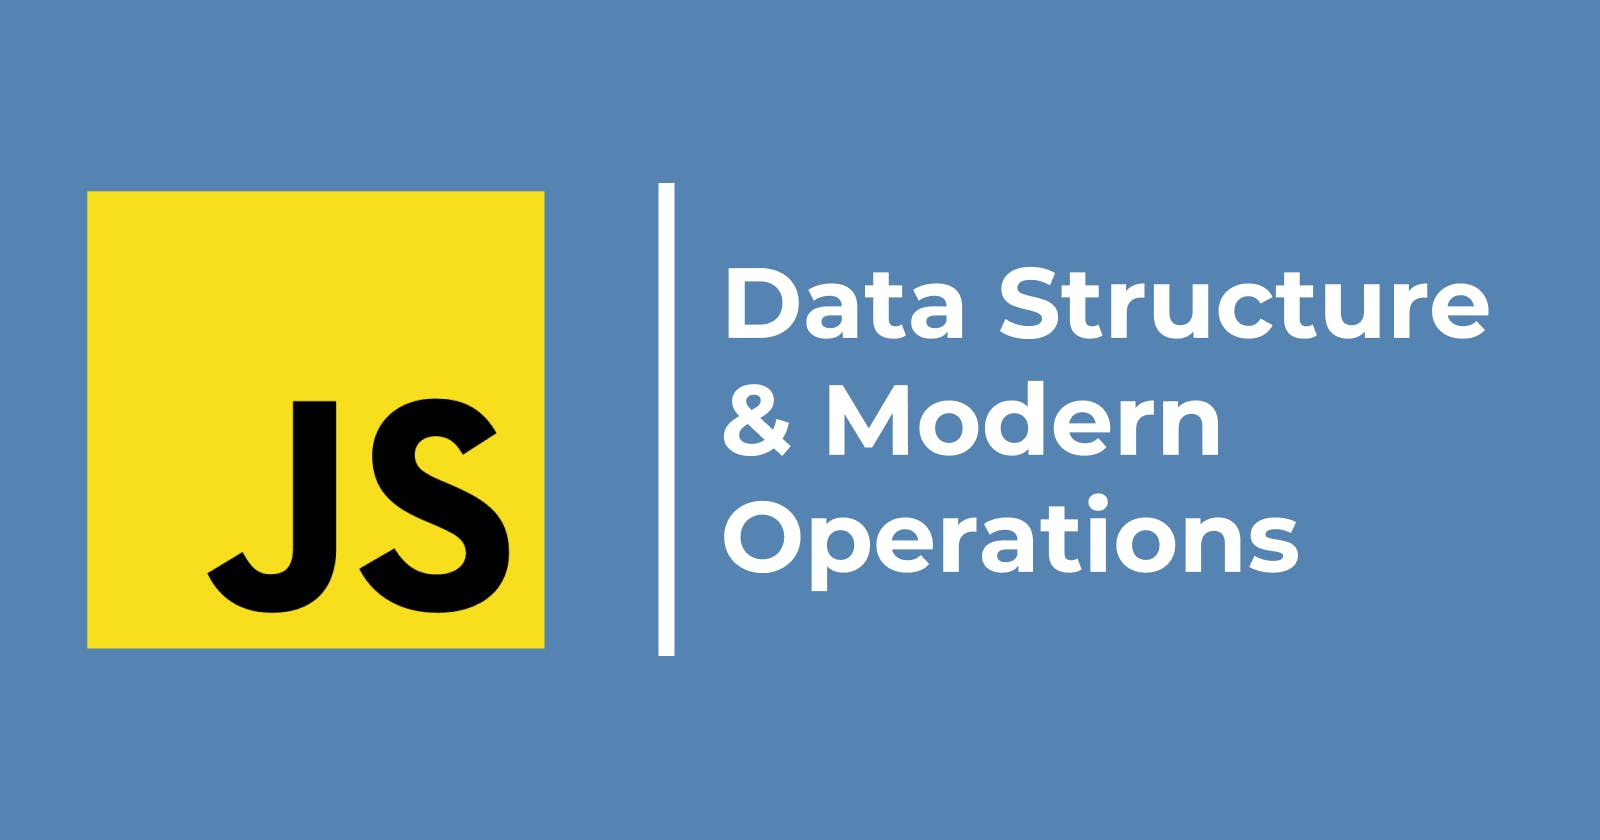 Data Structures and Modern Operators